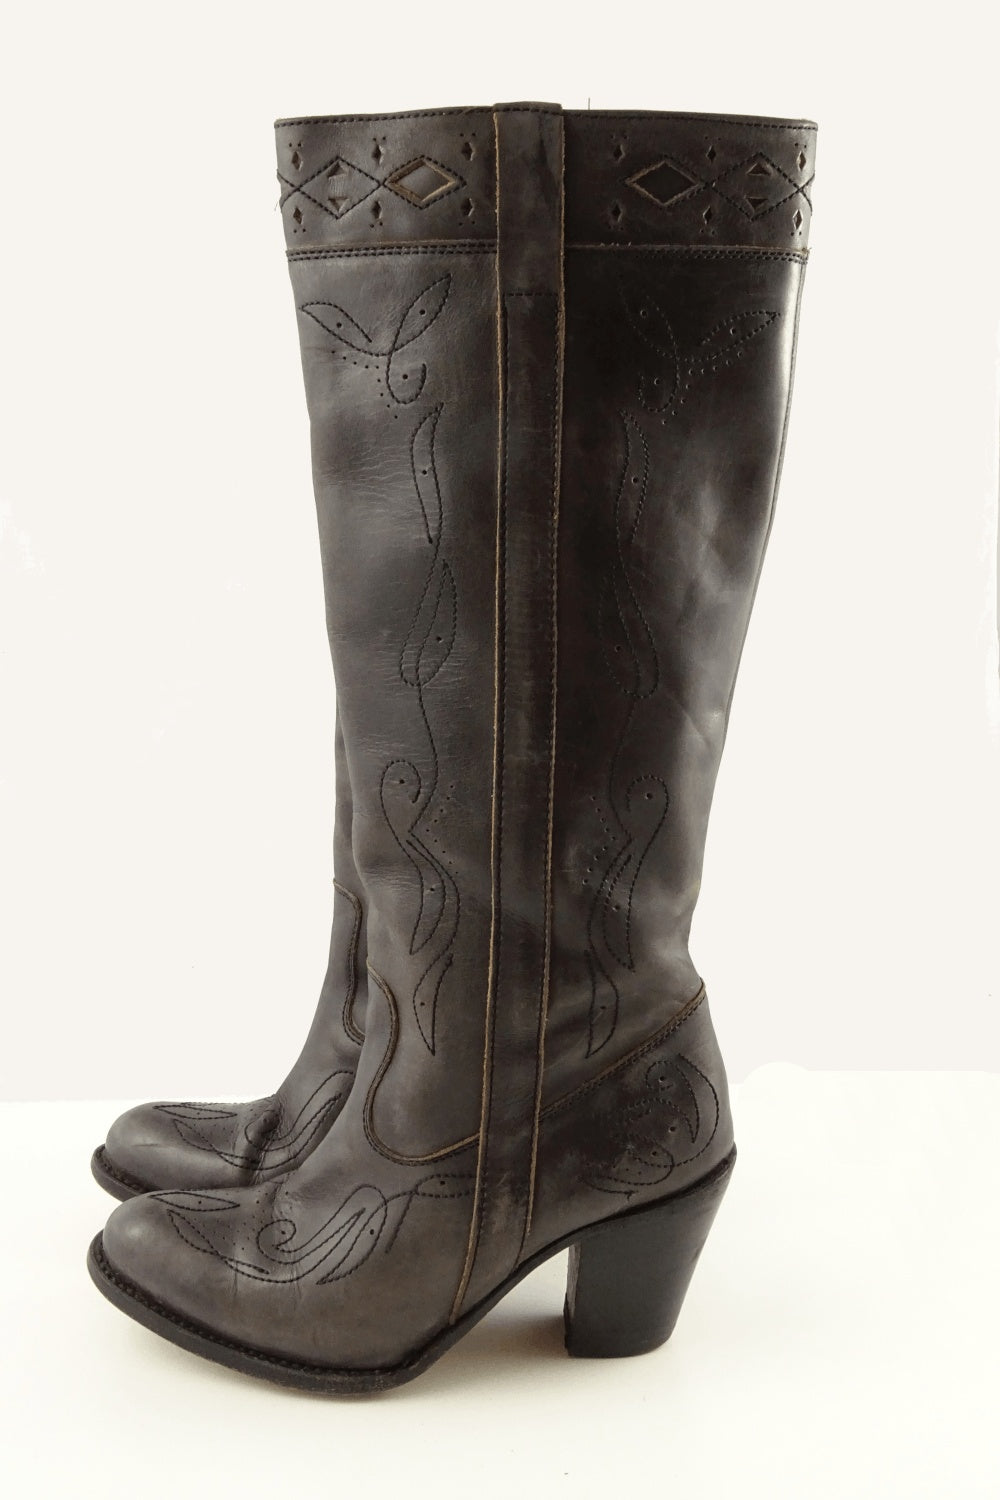 Sancho knee high boots with stitch detail. Has elastic wedge at tope of boot. Genuine leather. Made in Spain.